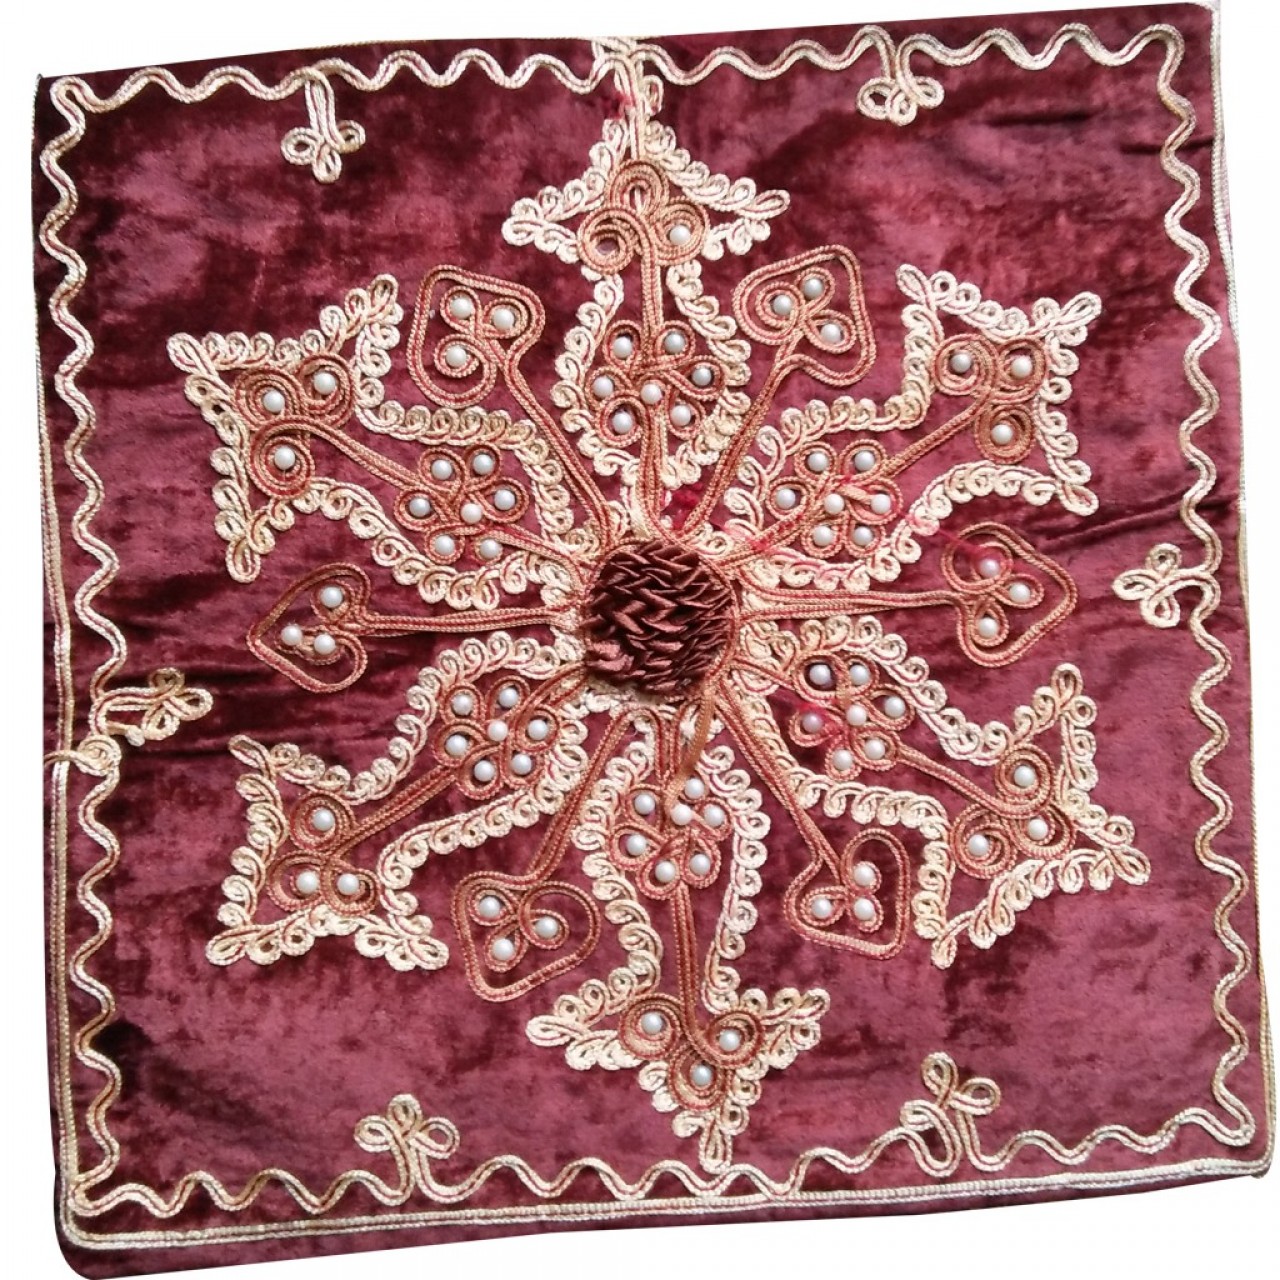 Velvet Cushion Cover With Fancy Lace - 5 Pieces